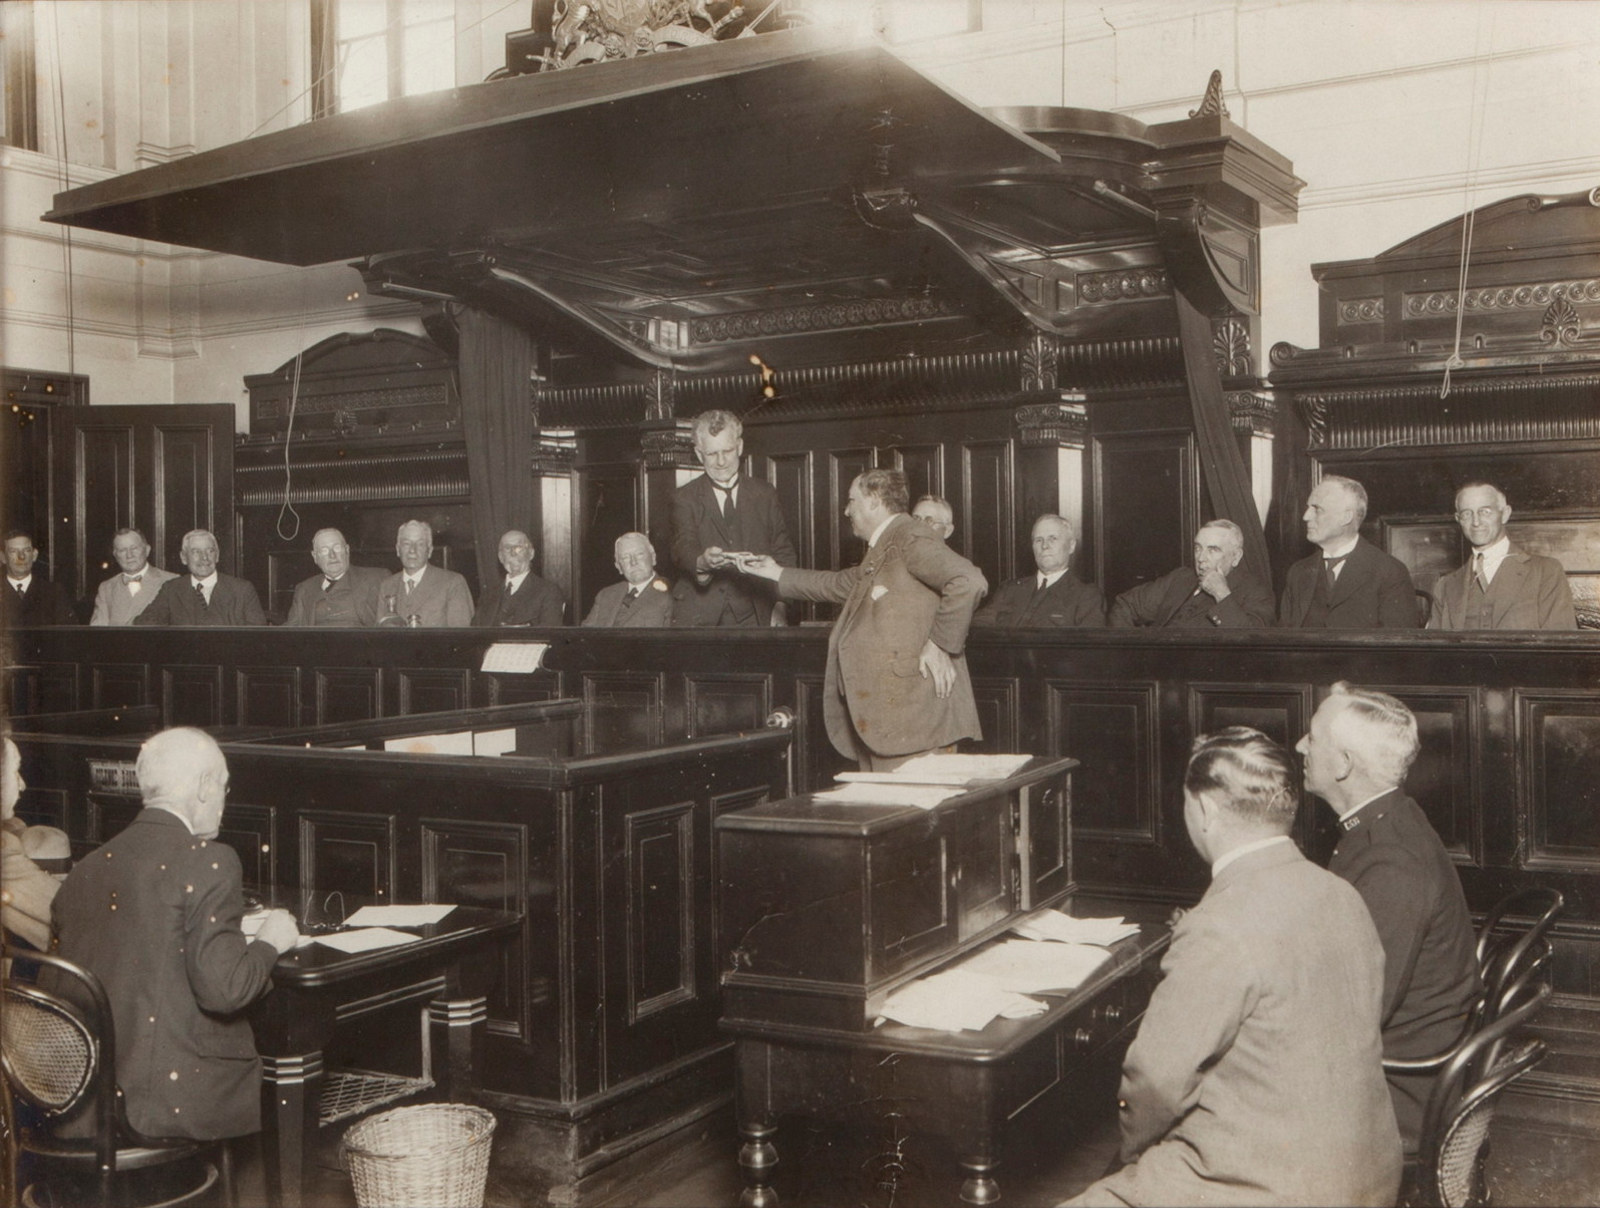 Courtroom full of men, focused on Magistrate in imposing wooden chair.